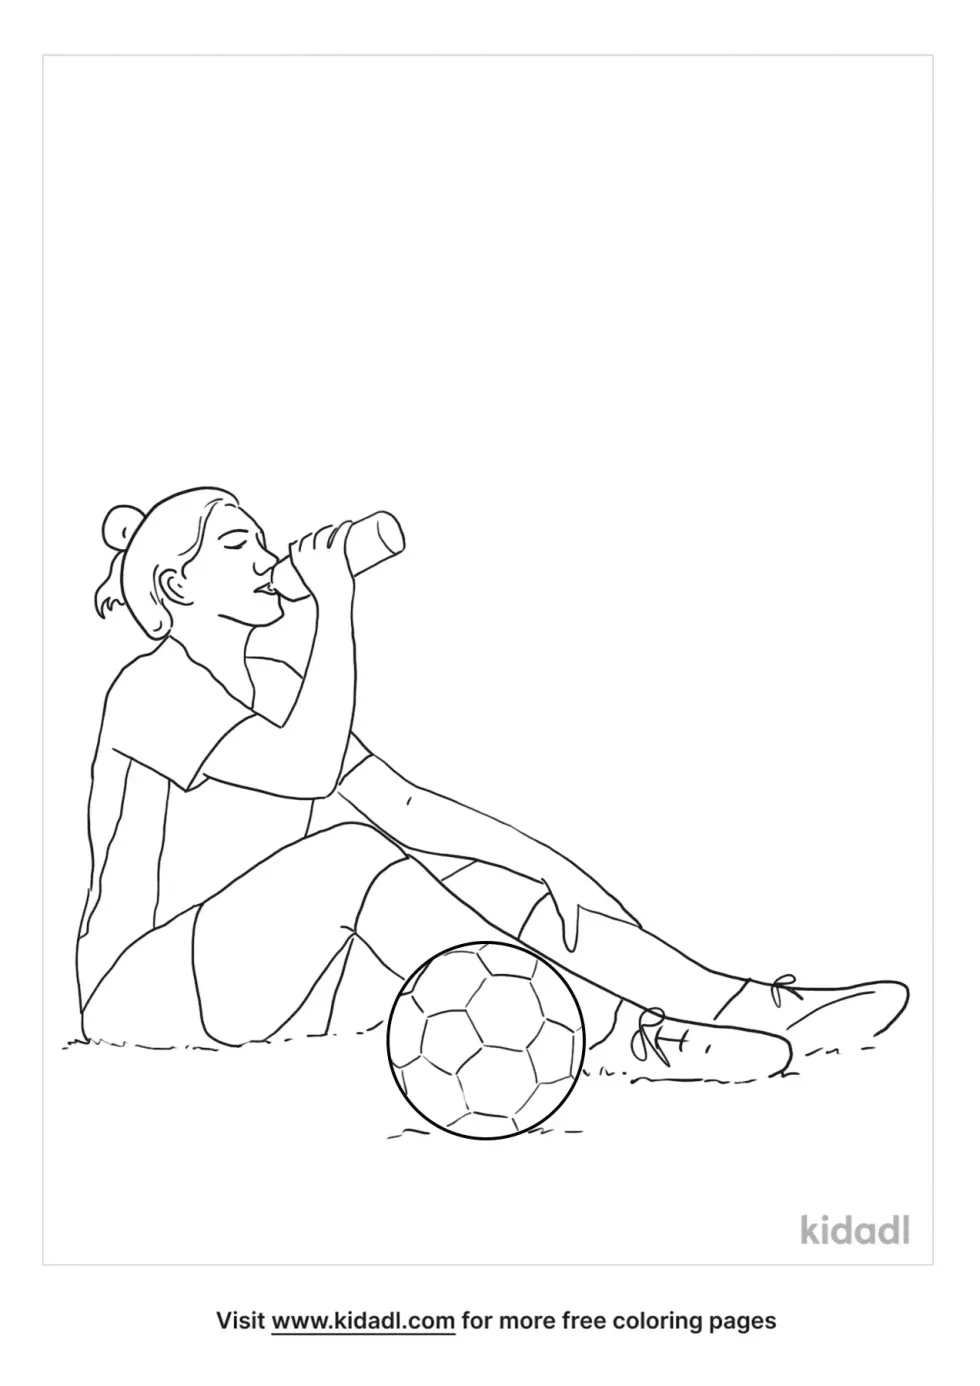 Resting Football Player Coloring Page